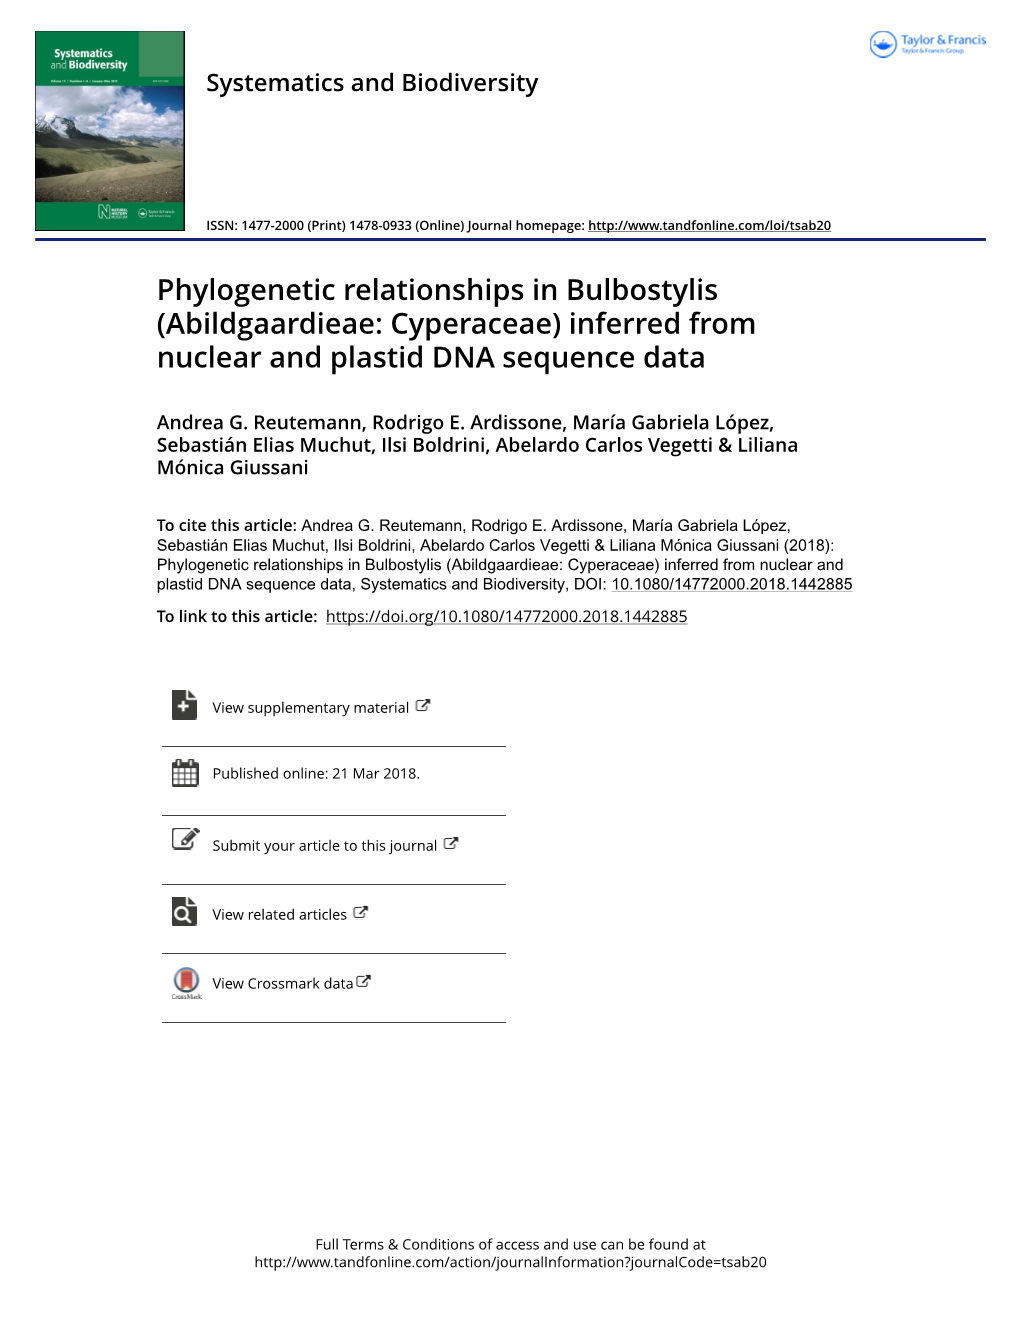 Phylogenetic Relationships in Bulbostylis (Abildgaardieae: Cyperaceae) Inferred from Nuclear and Plastid DNA Sequence Data